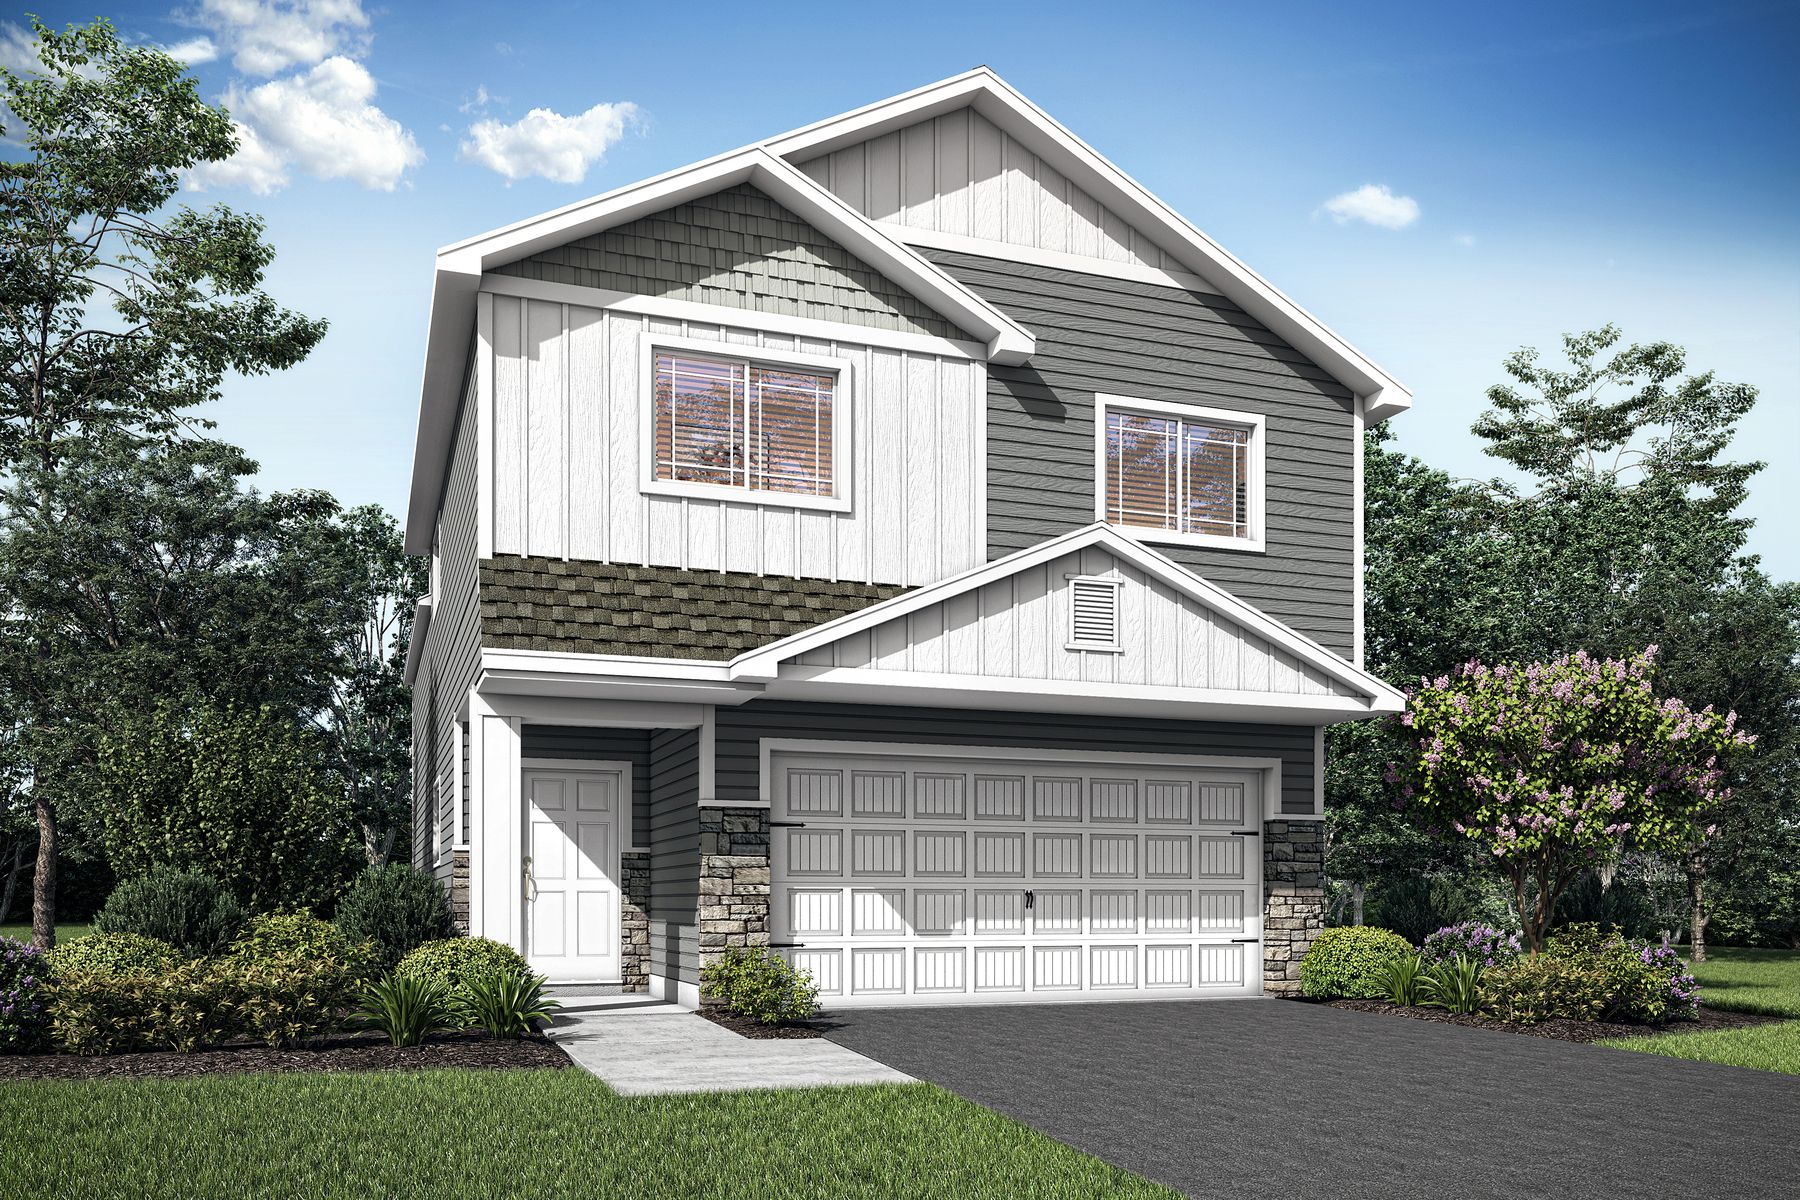 The St. Henry by LGI Homes